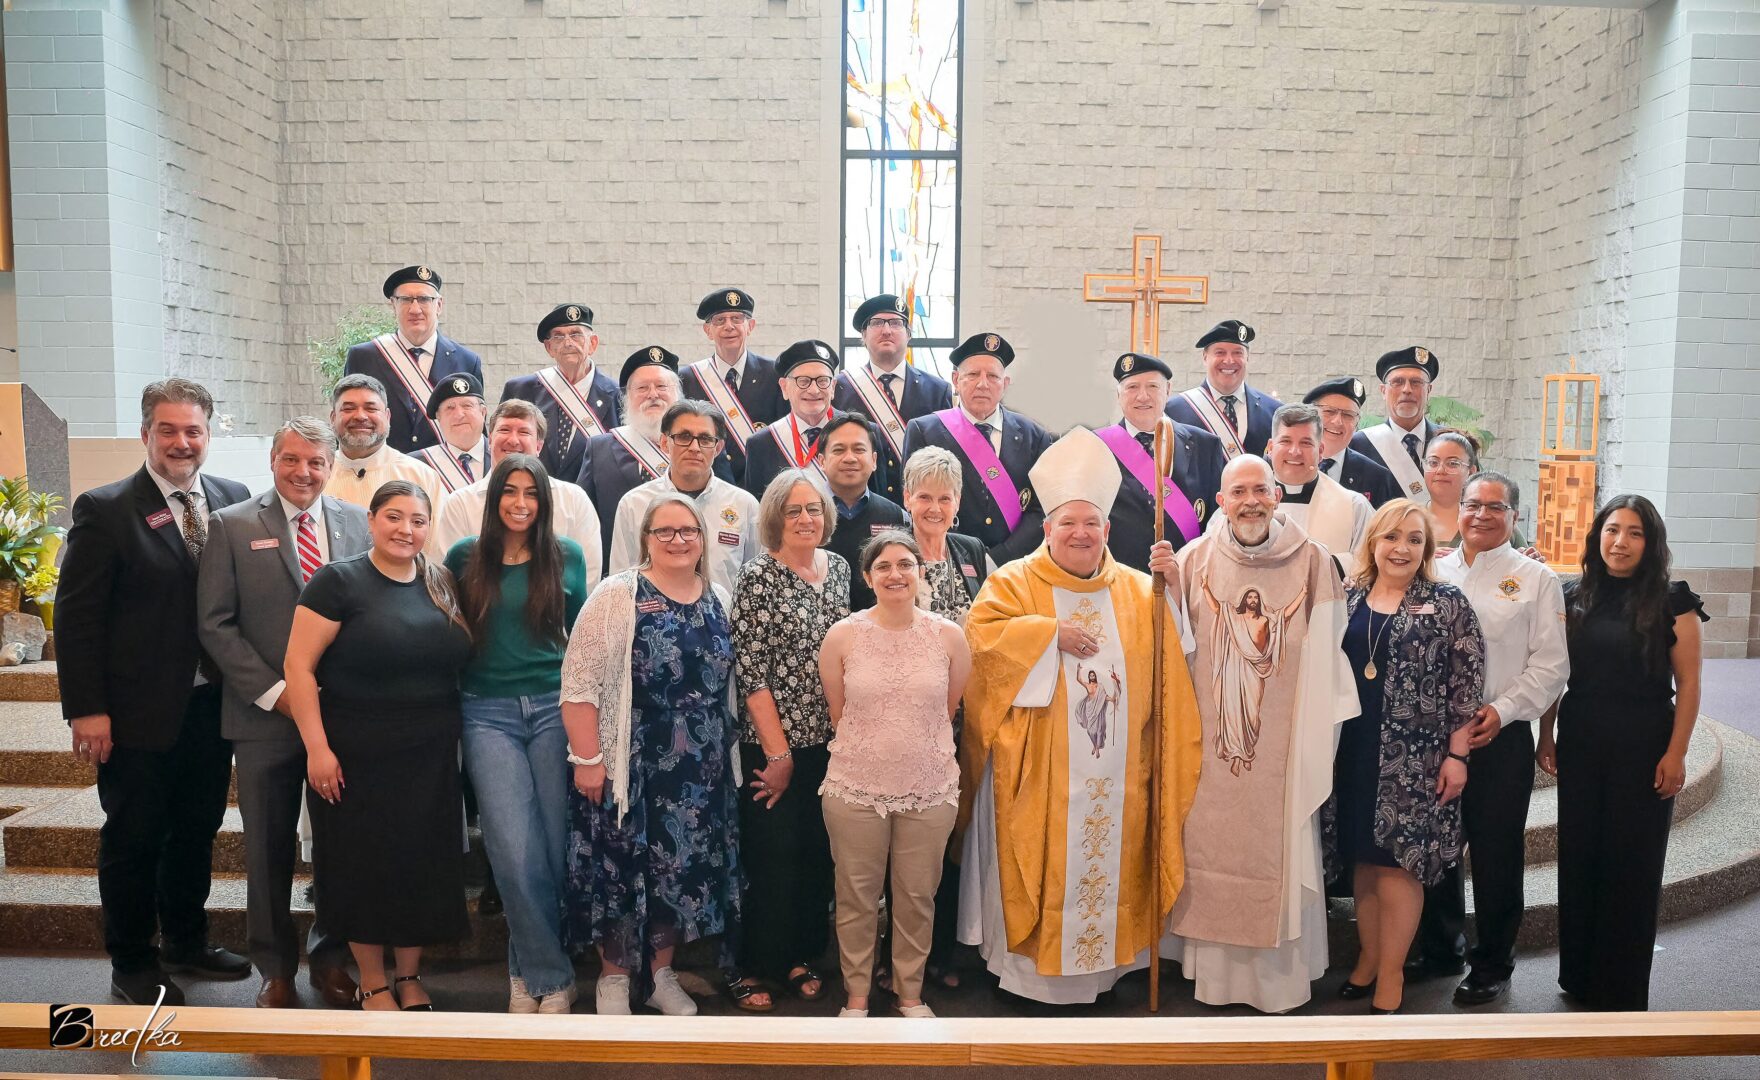 Group of people in church with a bishop.